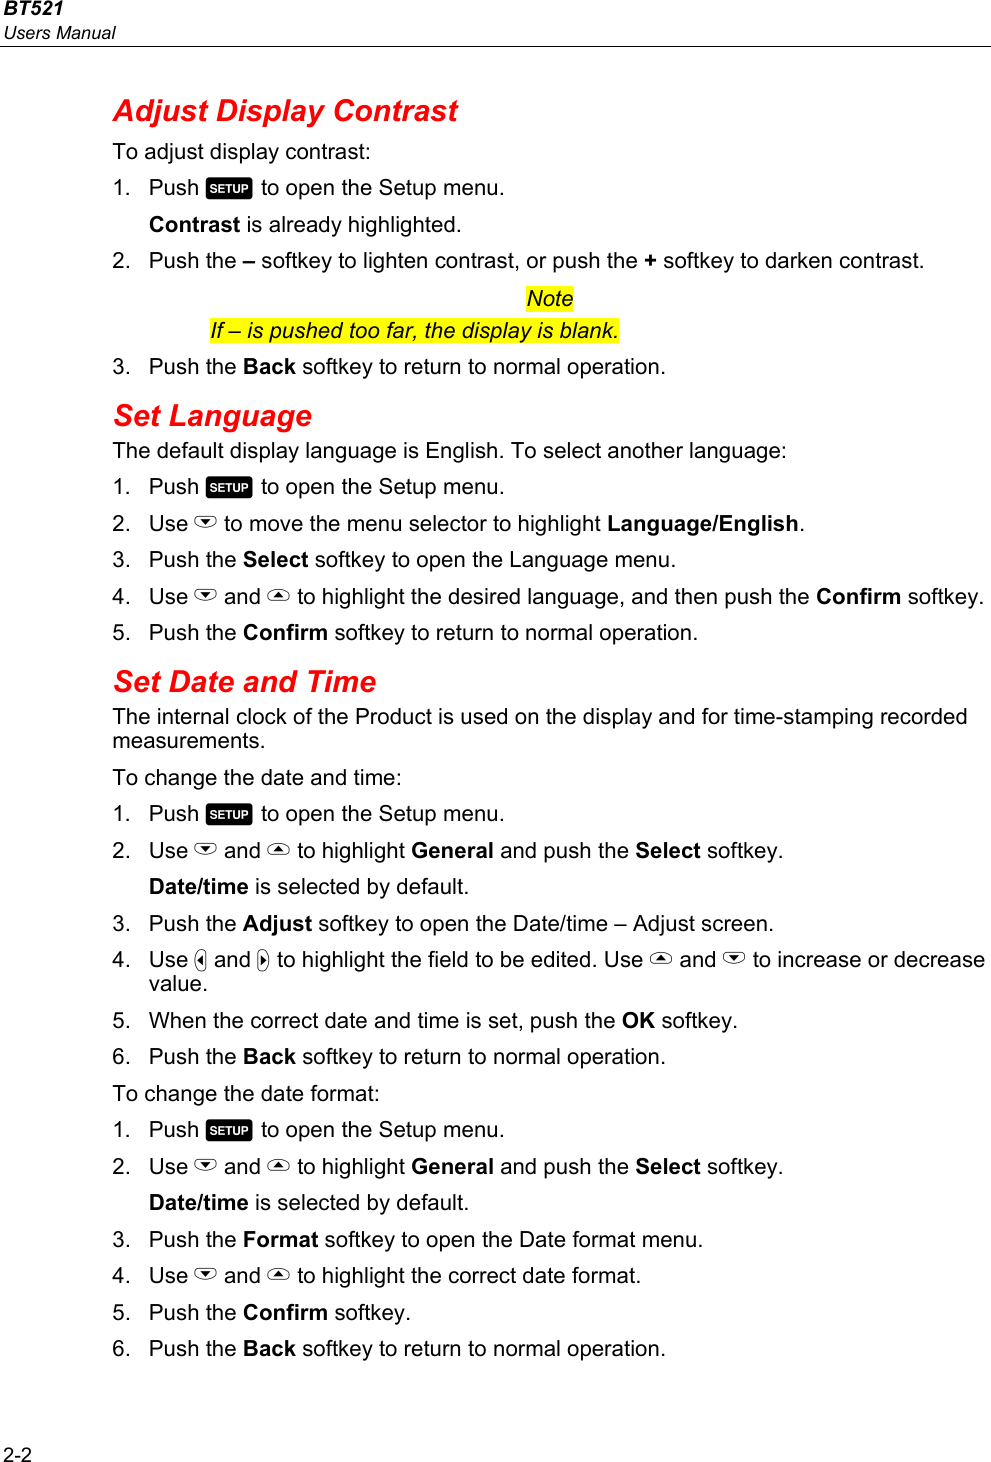 BT521 Users Manual 2-2 Adjust Display Contrast To adjust display contrast: 1. Push  to open the Setup menu. Contrast is already highlighted. 2. Push the – softkey to lighten contrast, or push the + softkey to darken contrast. Note If – is pushed too far, the display is blank. 3. Push the Back softkey to return to normal operation. Set Language The default display language is English. To select another language: 1. Push  to open the Setup menu.  2. Use L to move the menu selector to highlight Language/English. 3. Push the Select softkey to open the Language menu. 4. Use L and  to highlight the desired language, and then push the Confirm softkey.  5. Push the Confirm softkey to return to normal operation. Set Date and Time The internal clock of the Product is used on the display and for time-stamping recorded measurements. To change the date and time: 1. Push  to open the Setup menu.  2. Use L and  to highlight General and push the Select softkey. Date/time is selected by default. 3. Push the Adjust softkey to open the Date/time – Adjust screen. 4. Use  and  to highlight the field to be edited. Use  and L to increase or decrease value. 5.  When the correct date and time is set, push the OK softkey. 6. Push the Back softkey to return to normal operation. To change the date format: 1. Push  to open the Setup menu.  2. Use L and  to highlight General and push the Select softkey. Date/time is selected by default. 3. Push the Format softkey to open the Date format menu. 4. Use L and  to highlight the correct date format. 5. Push the Confirm softkey. 6. Push the Back softkey to return to normal operation. 